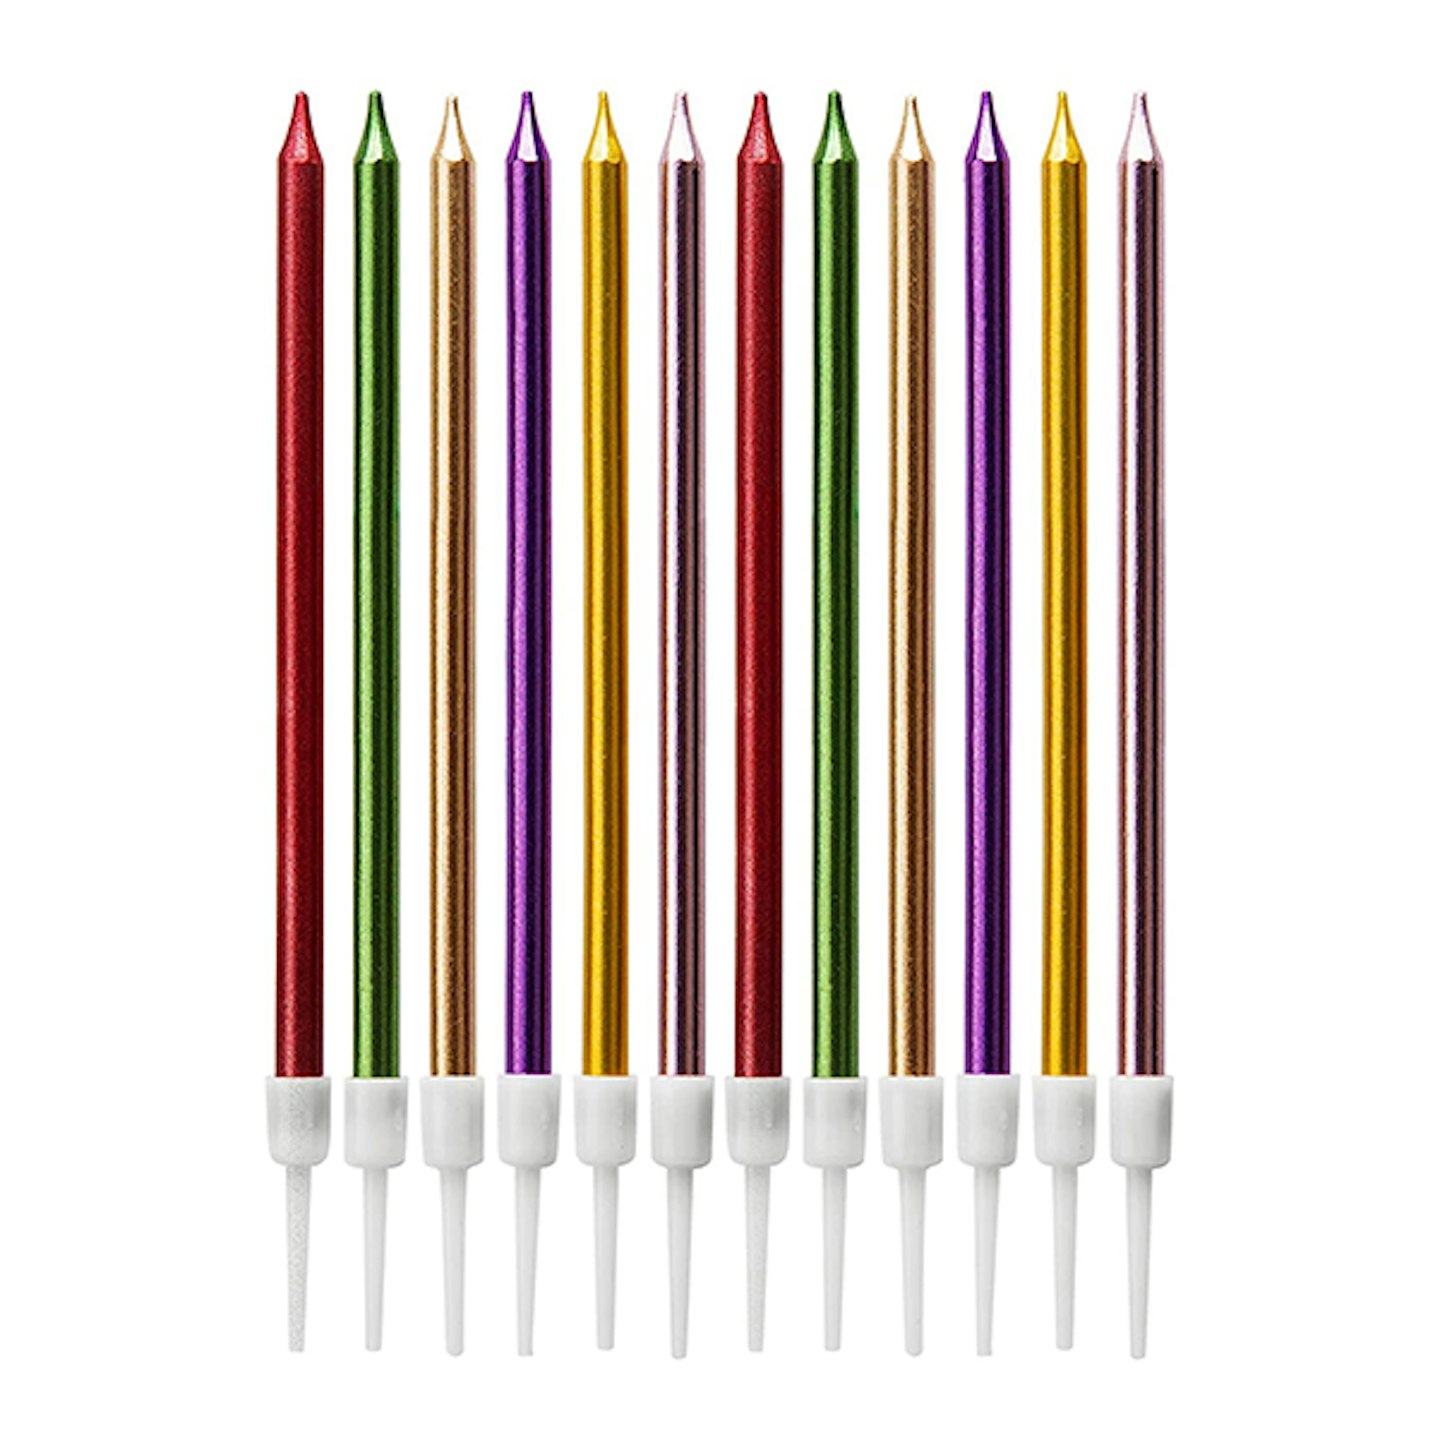 LUTER Metallic Birthday Candles in Holders Multi Color